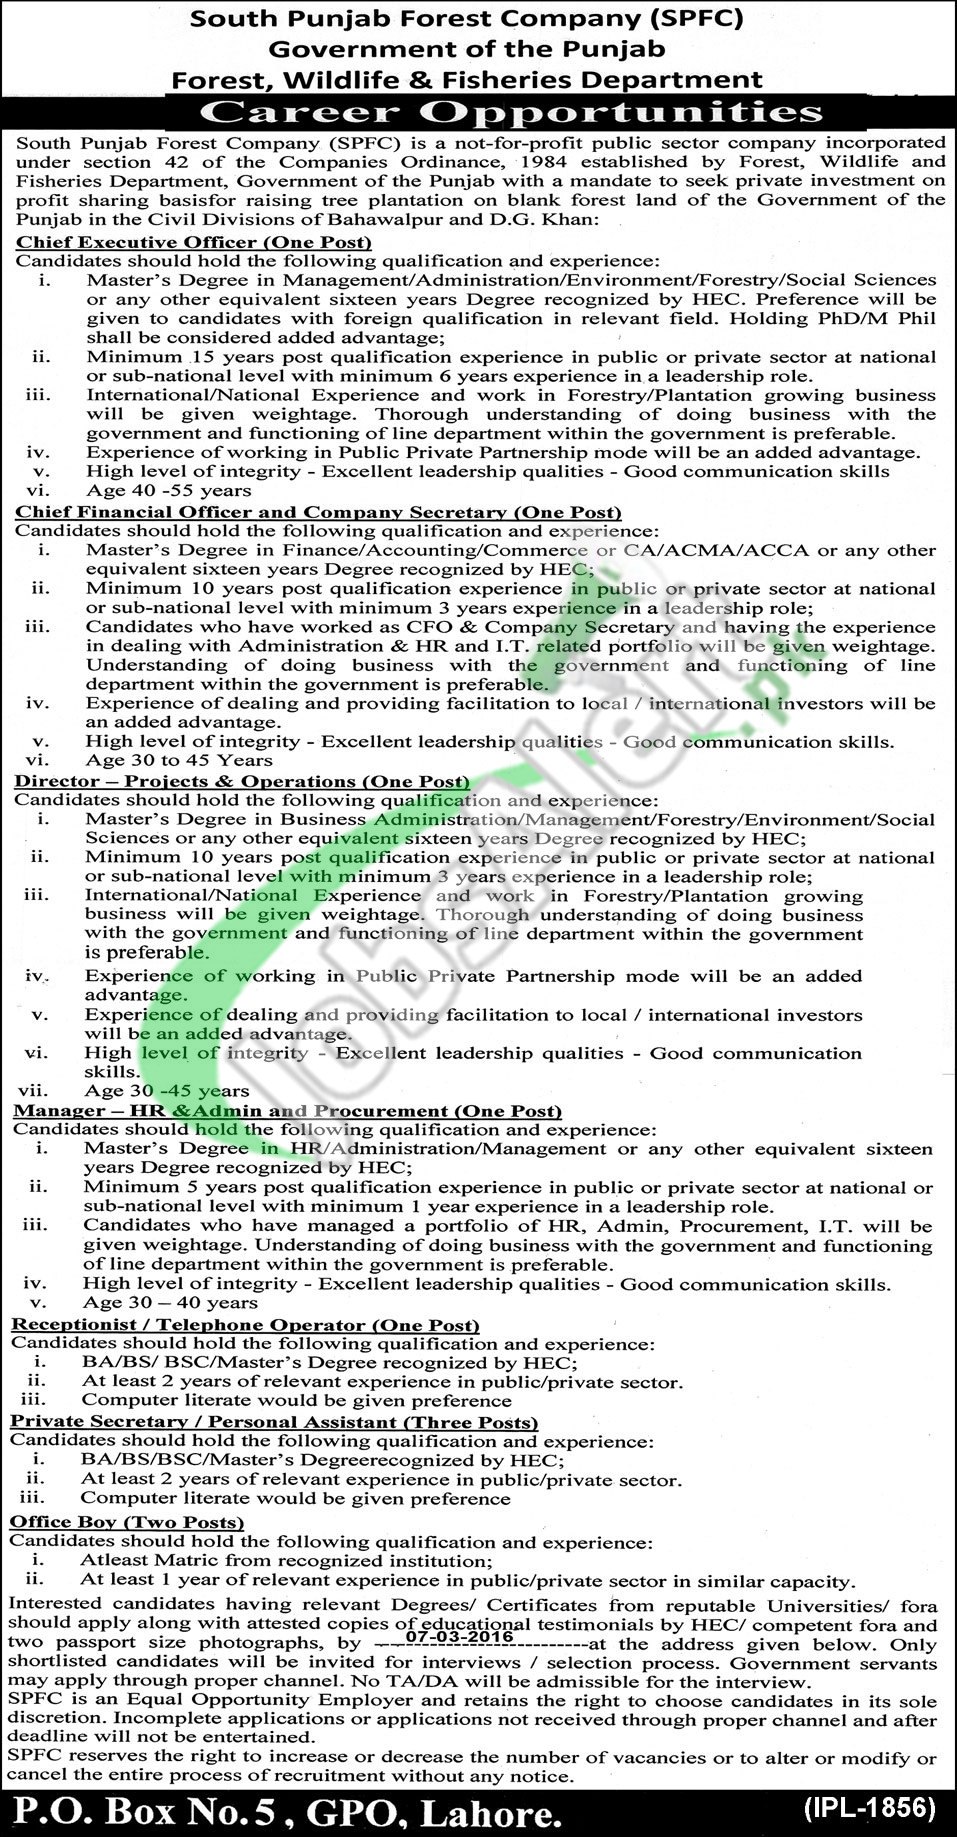 South Punjab Forest Company Jobs